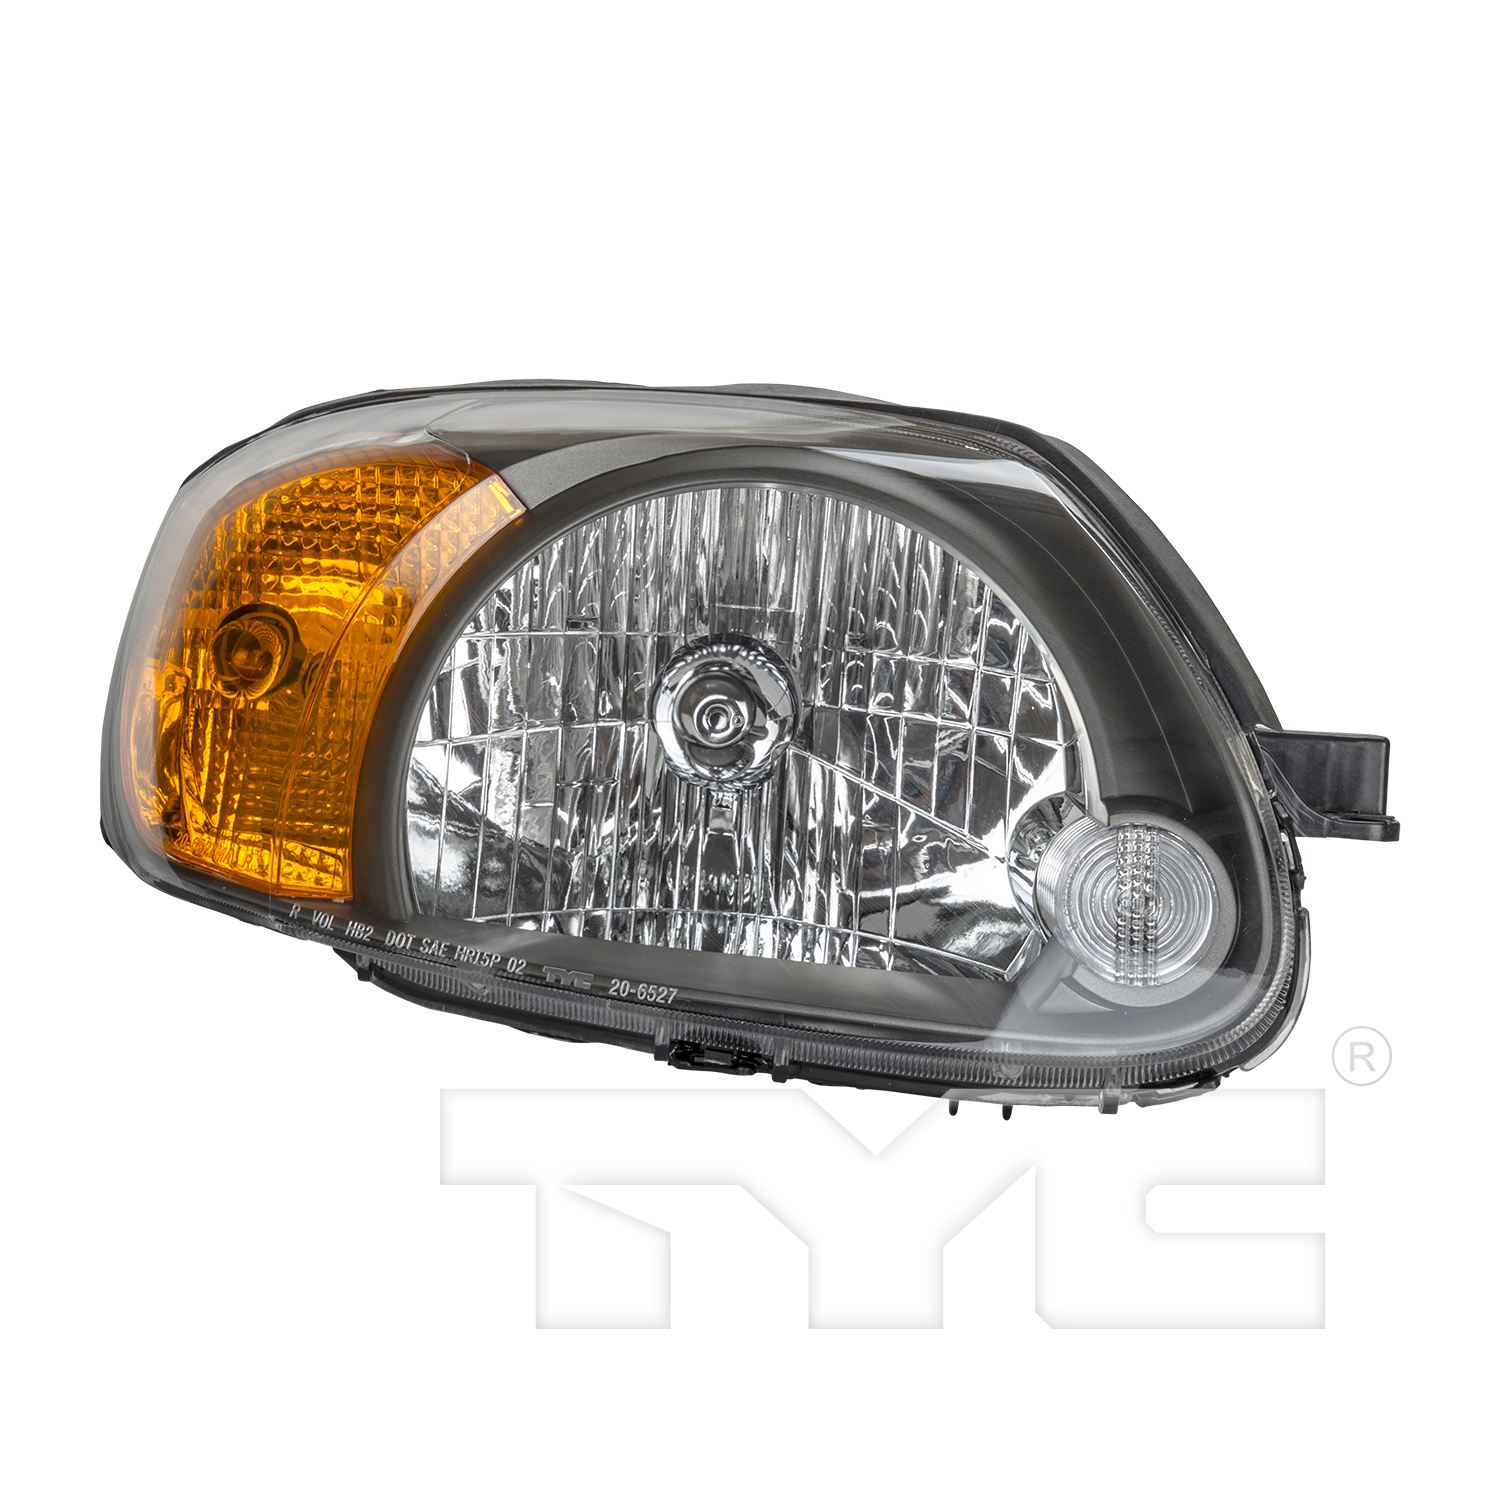 Aftermarket HEADLIGHTS for HYUNDAI - ACCENT, ACCENT,03-06,RT Headlamp assy composite